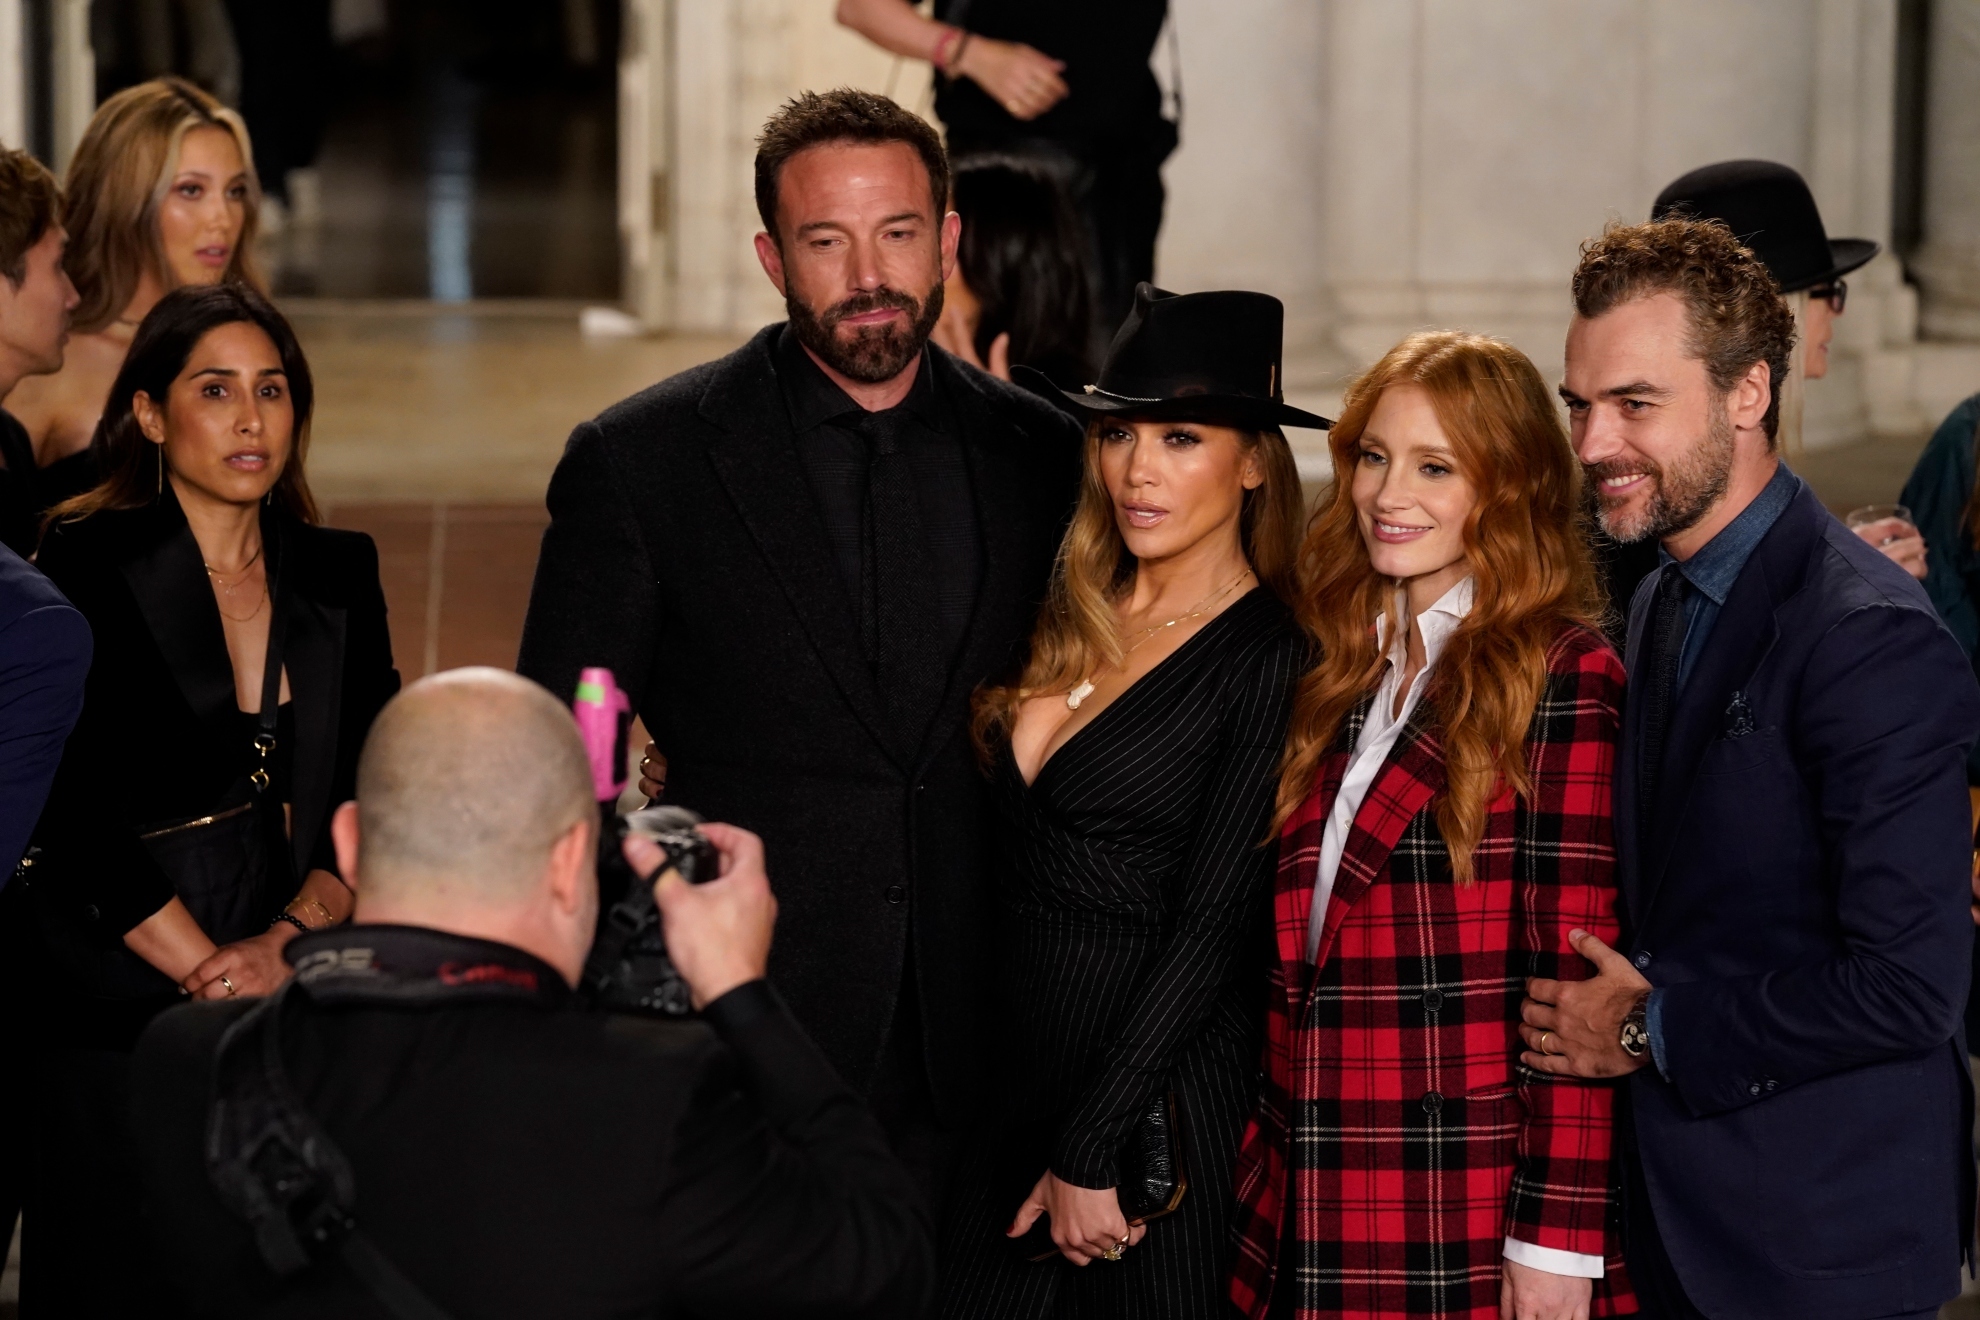 Ben Affleck, from left, Jennifer Lopez, Jessica Chastain and Gian Luca Passi de Preposulo attend the Ralph Lauren Spring 2023 Fashion Experience on Thursday, Oct. 13, 2022, at The Huntington in Pasadena, Calif. / AP